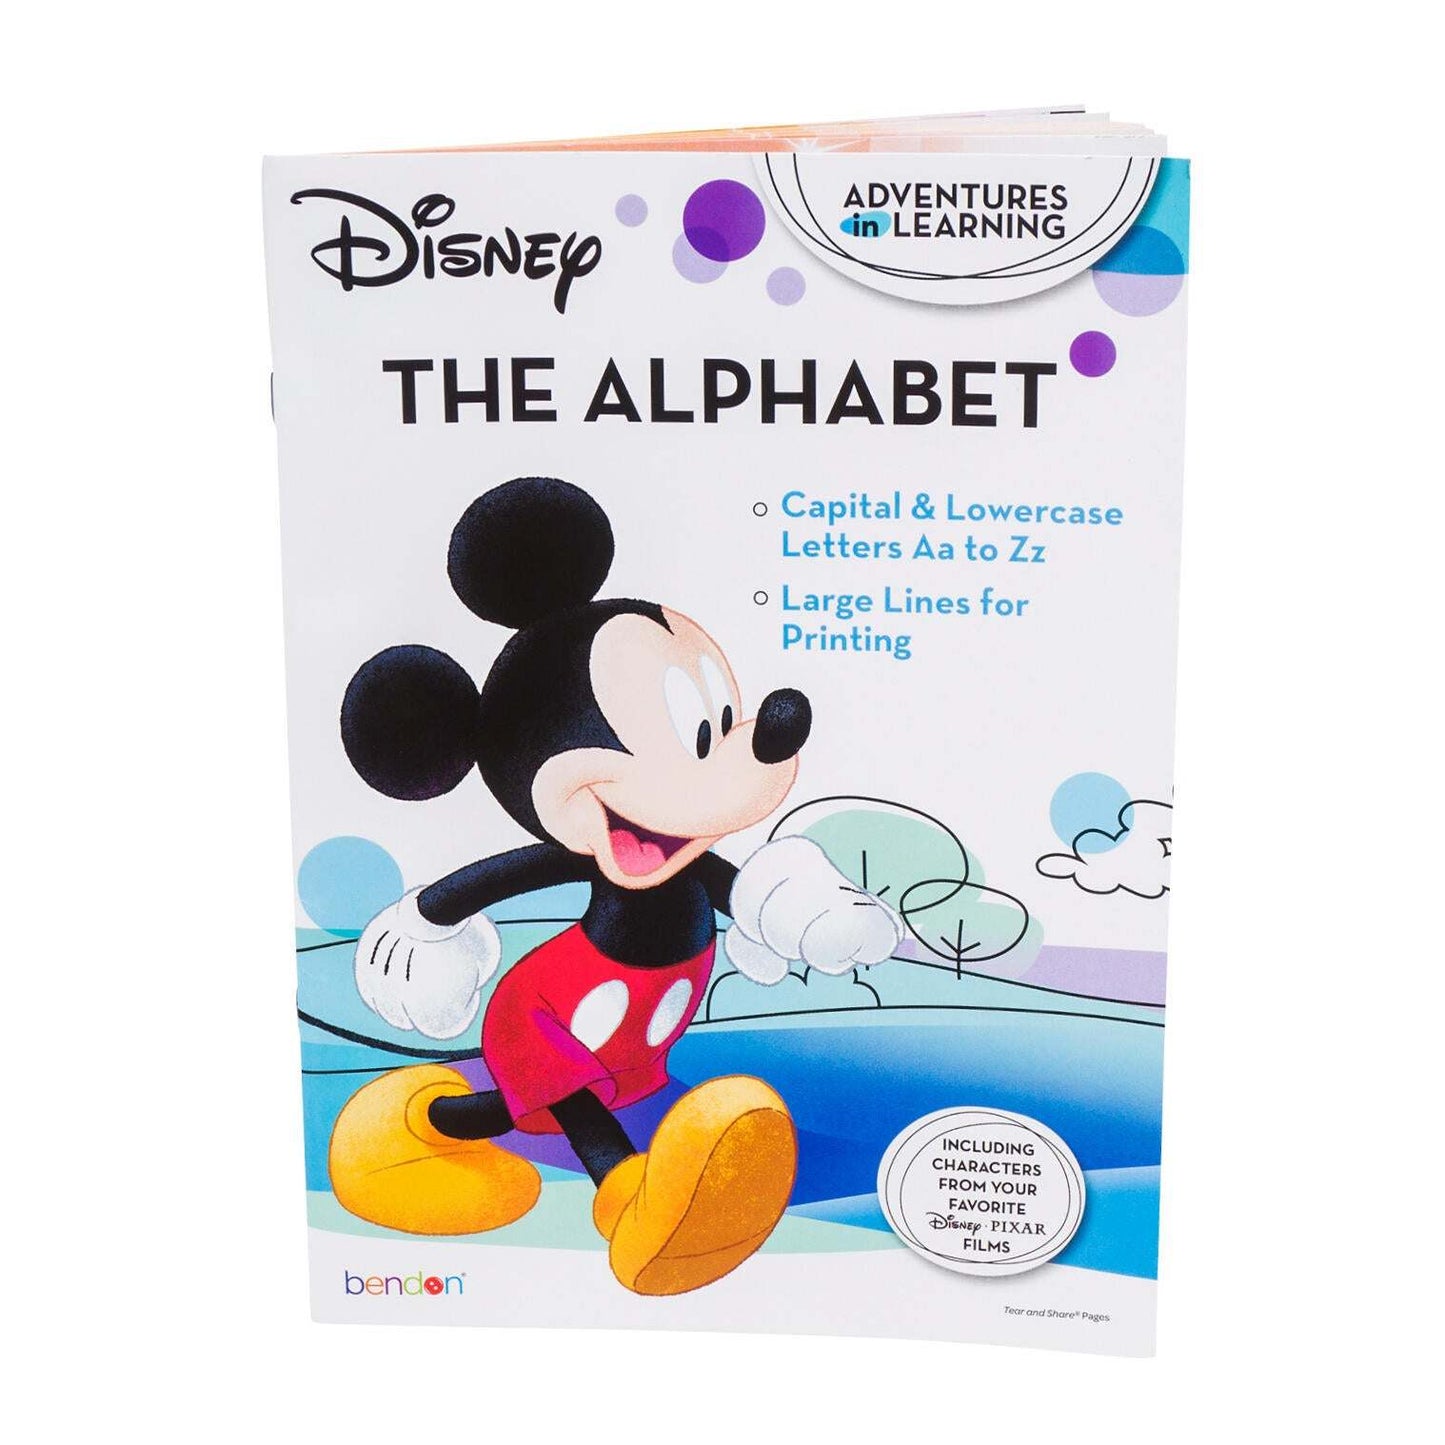 Disney Adventures in Learning Workbooks - Alphabet, Addition, and Subtraction